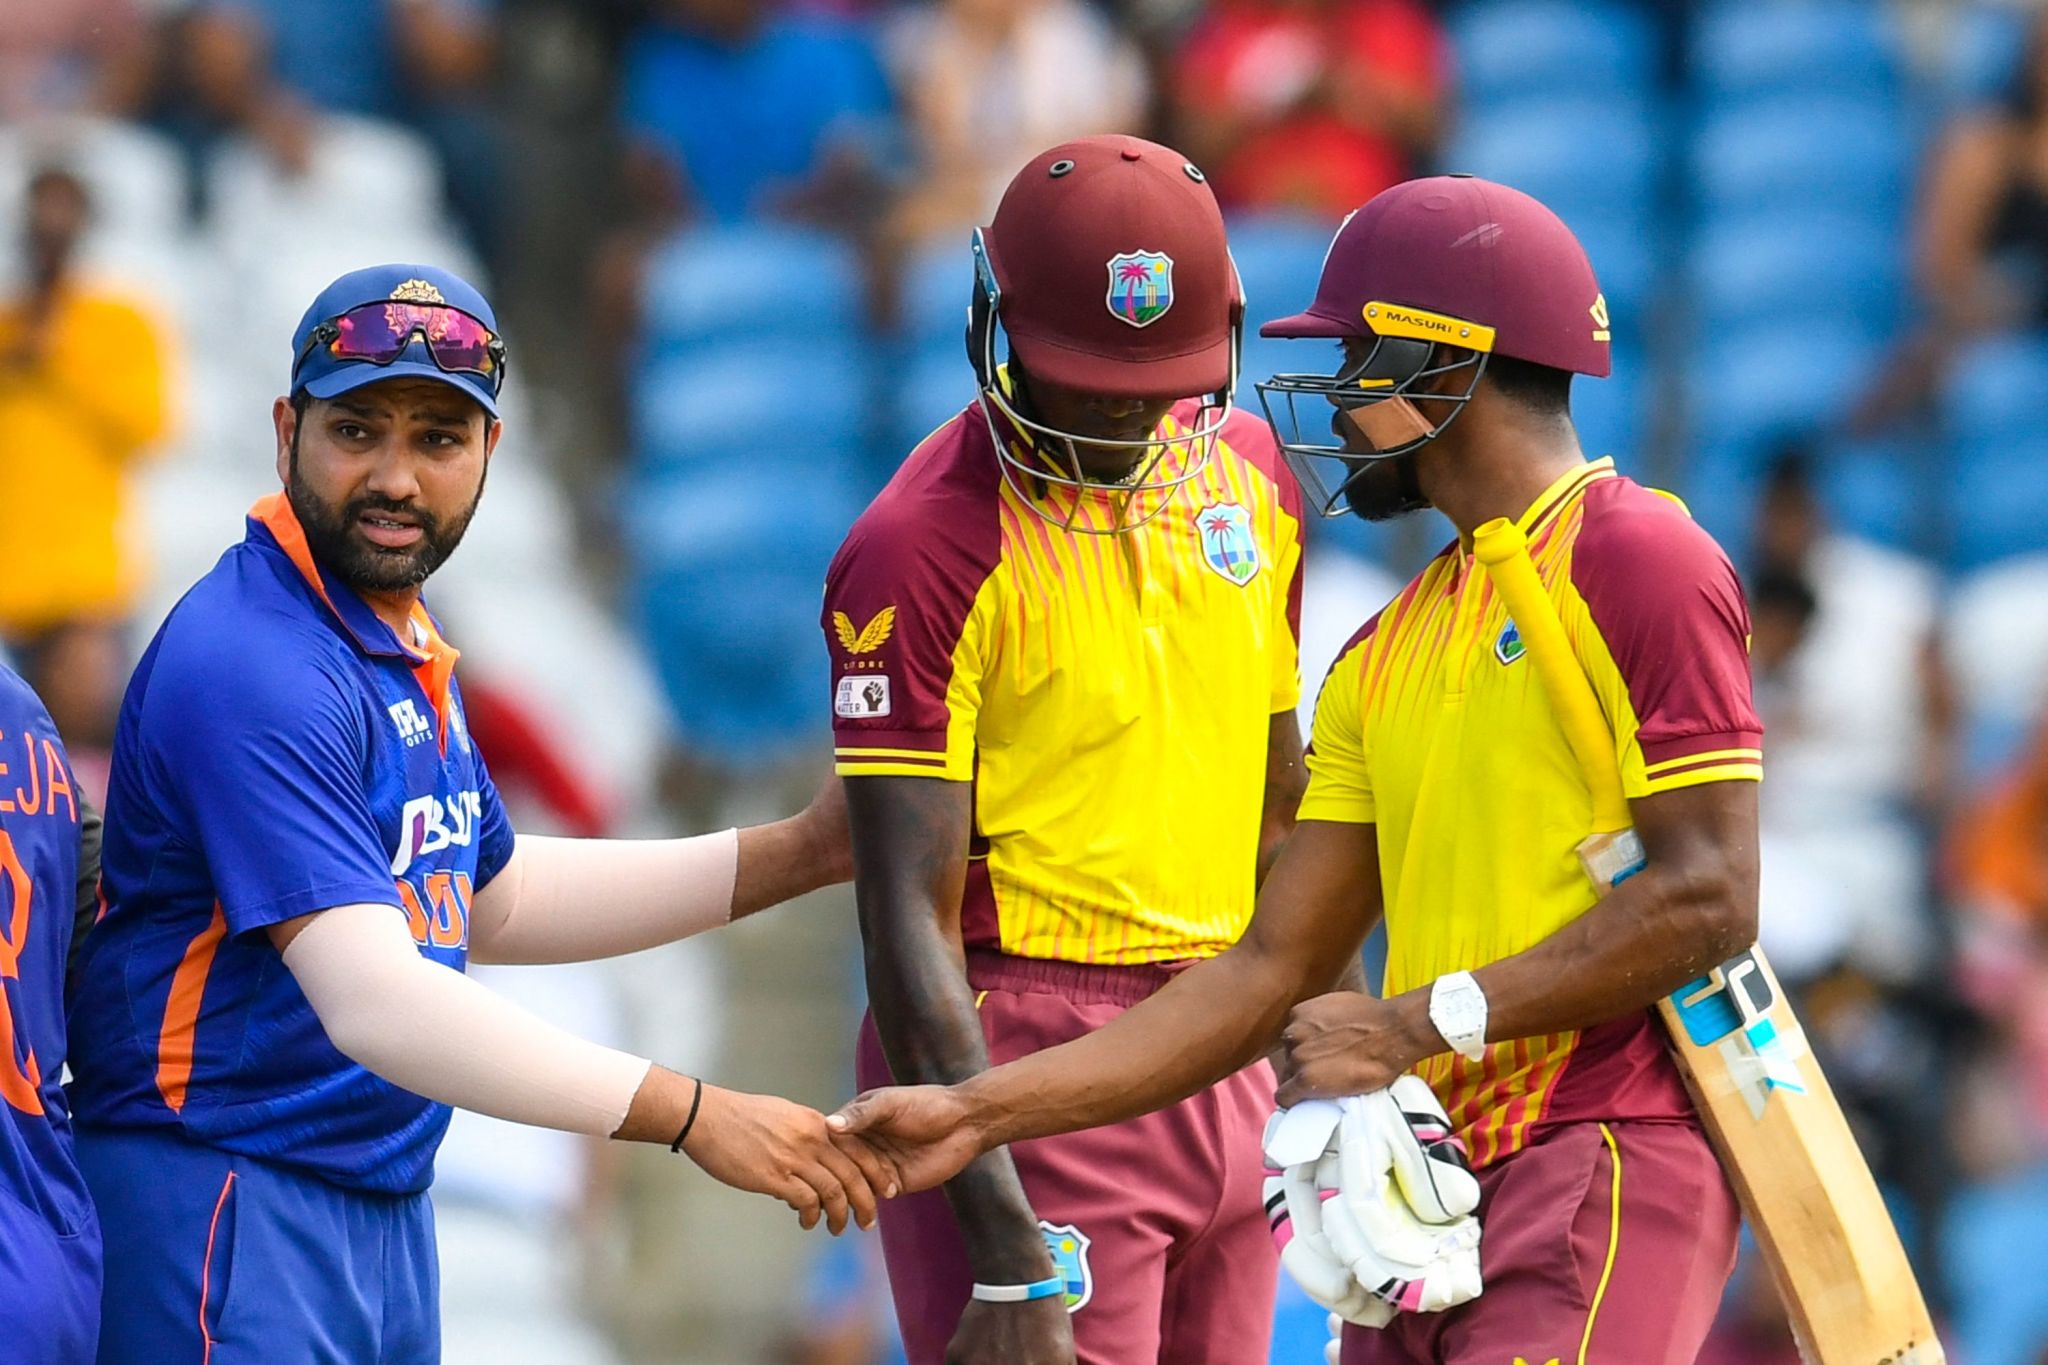 IND vs WI LIVE: All-round India thrash West Indies by 68 runs to take 1-0 lead: Check IND vs WI 1st T20 Highlights, India vs WestIndies 1st T20 Highlights